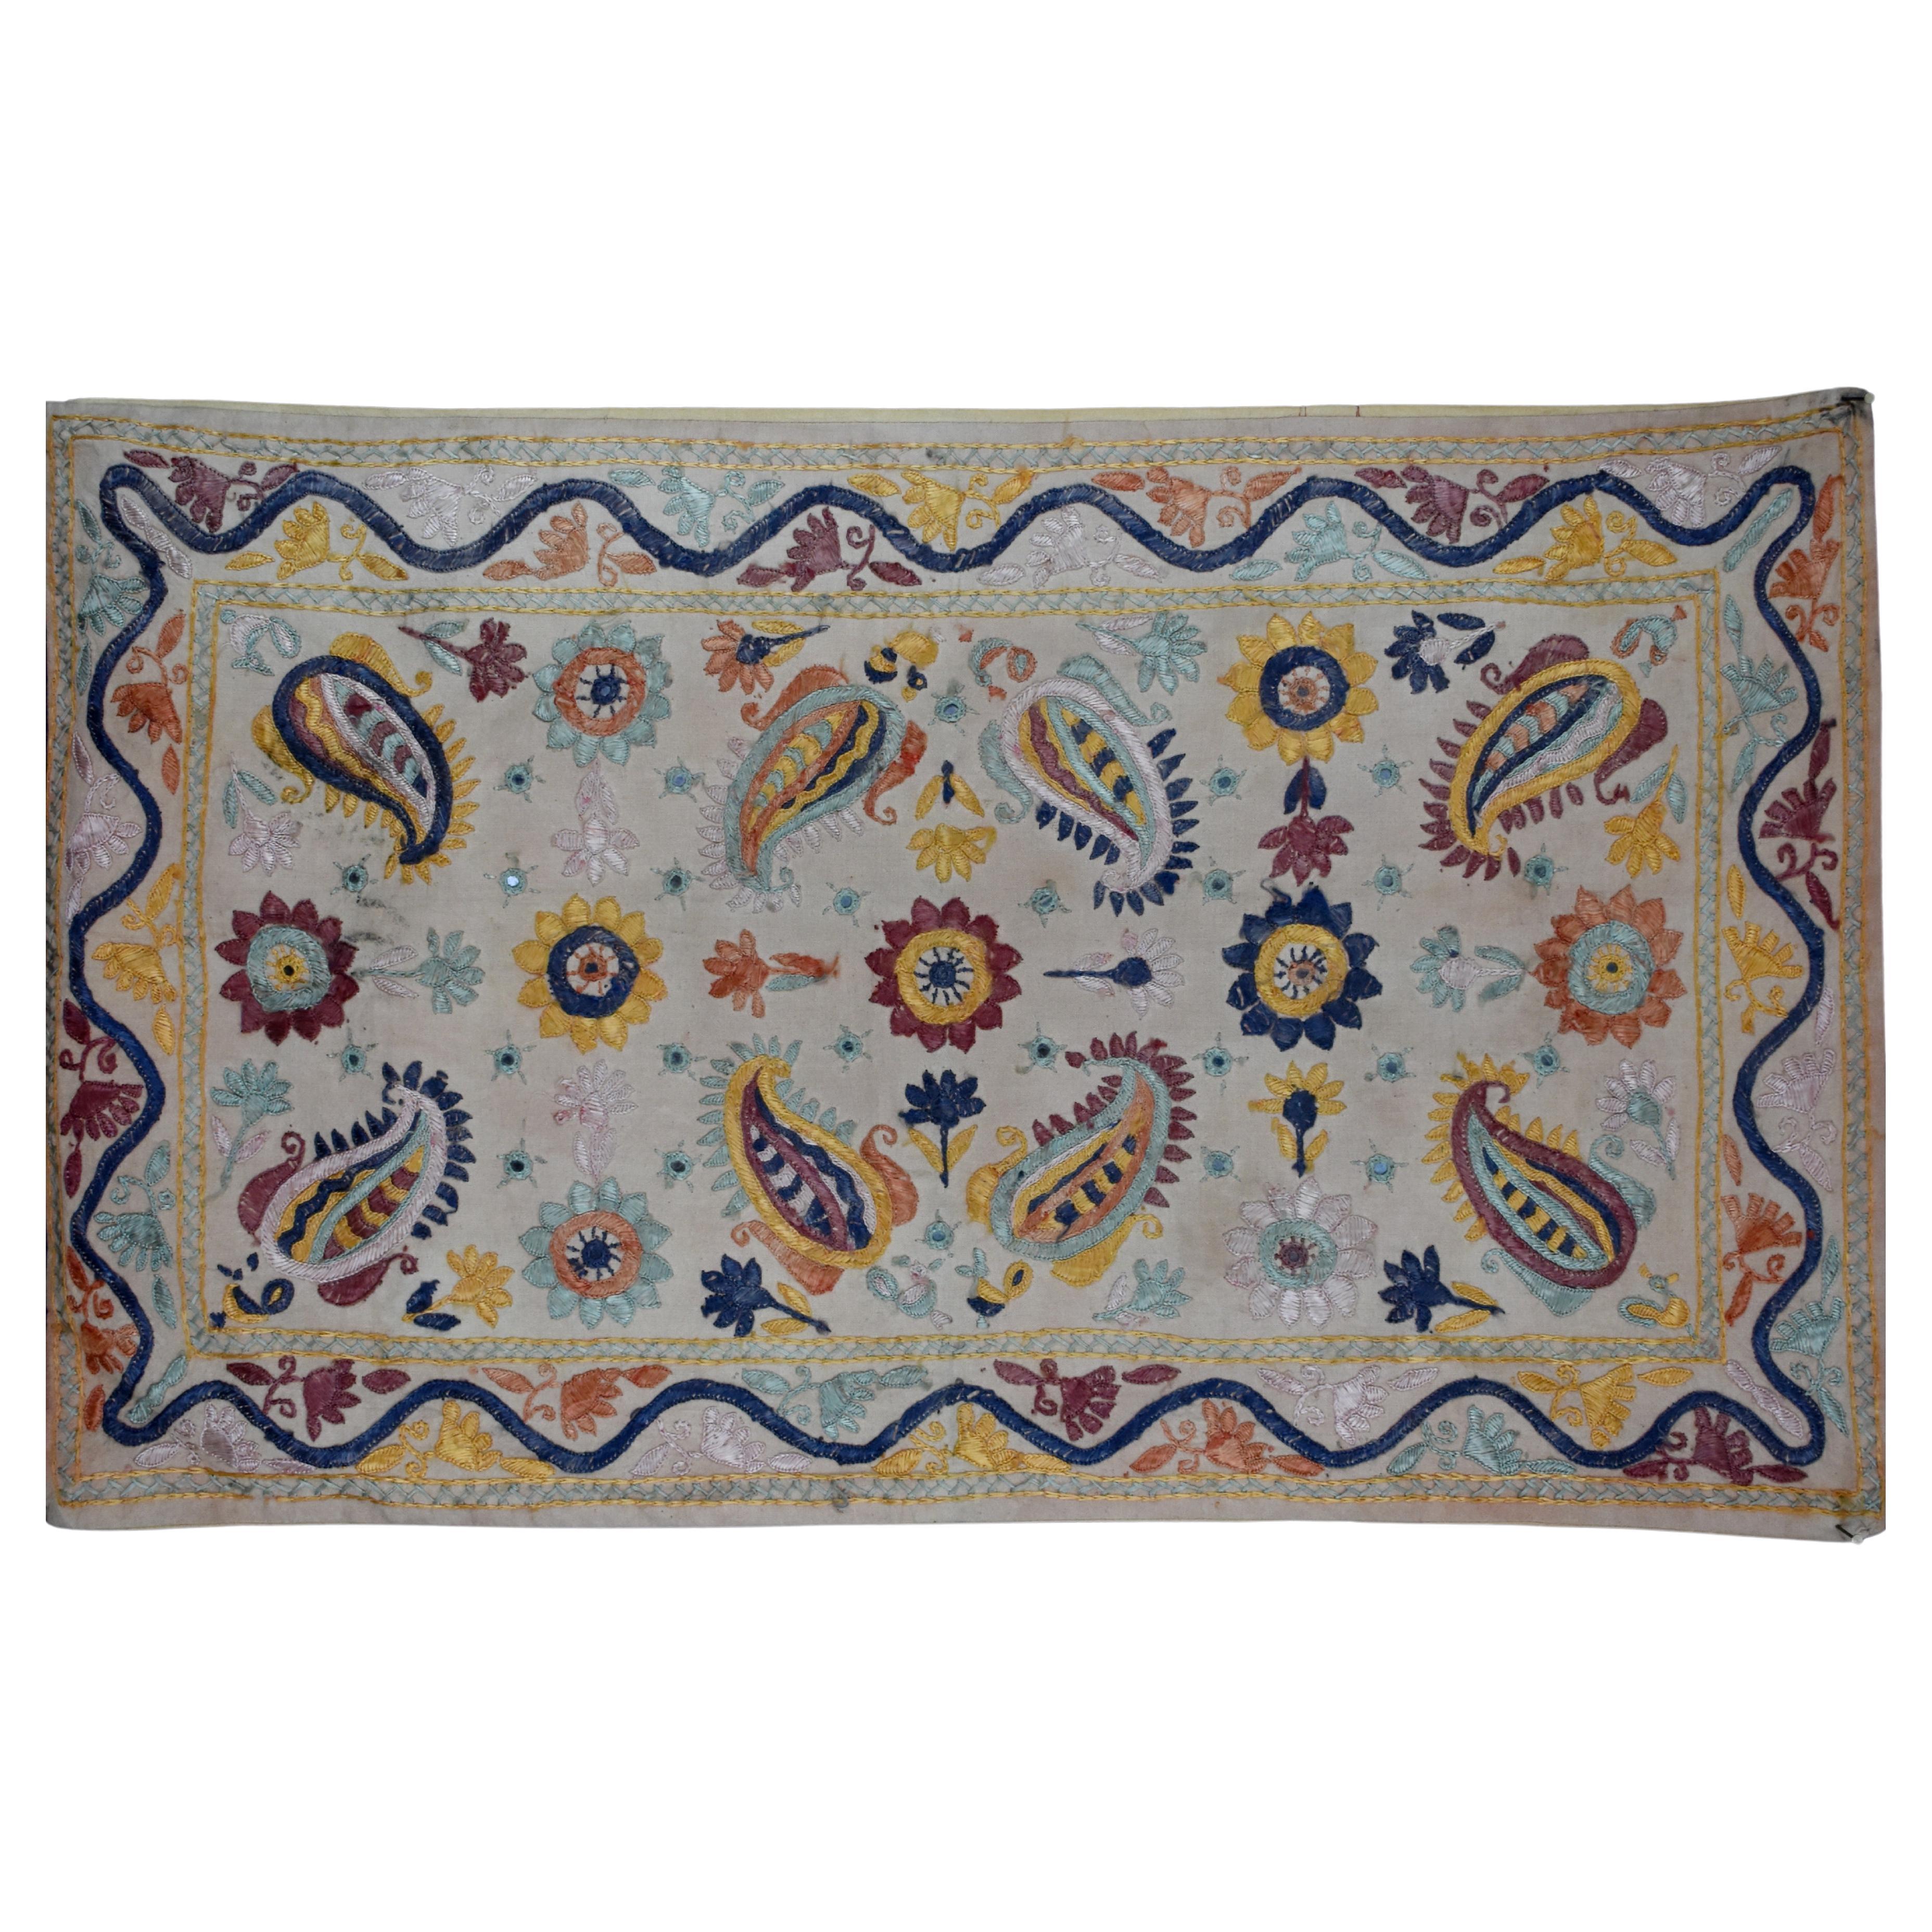 Uzbek Embroidered Cushion Cover For Sale